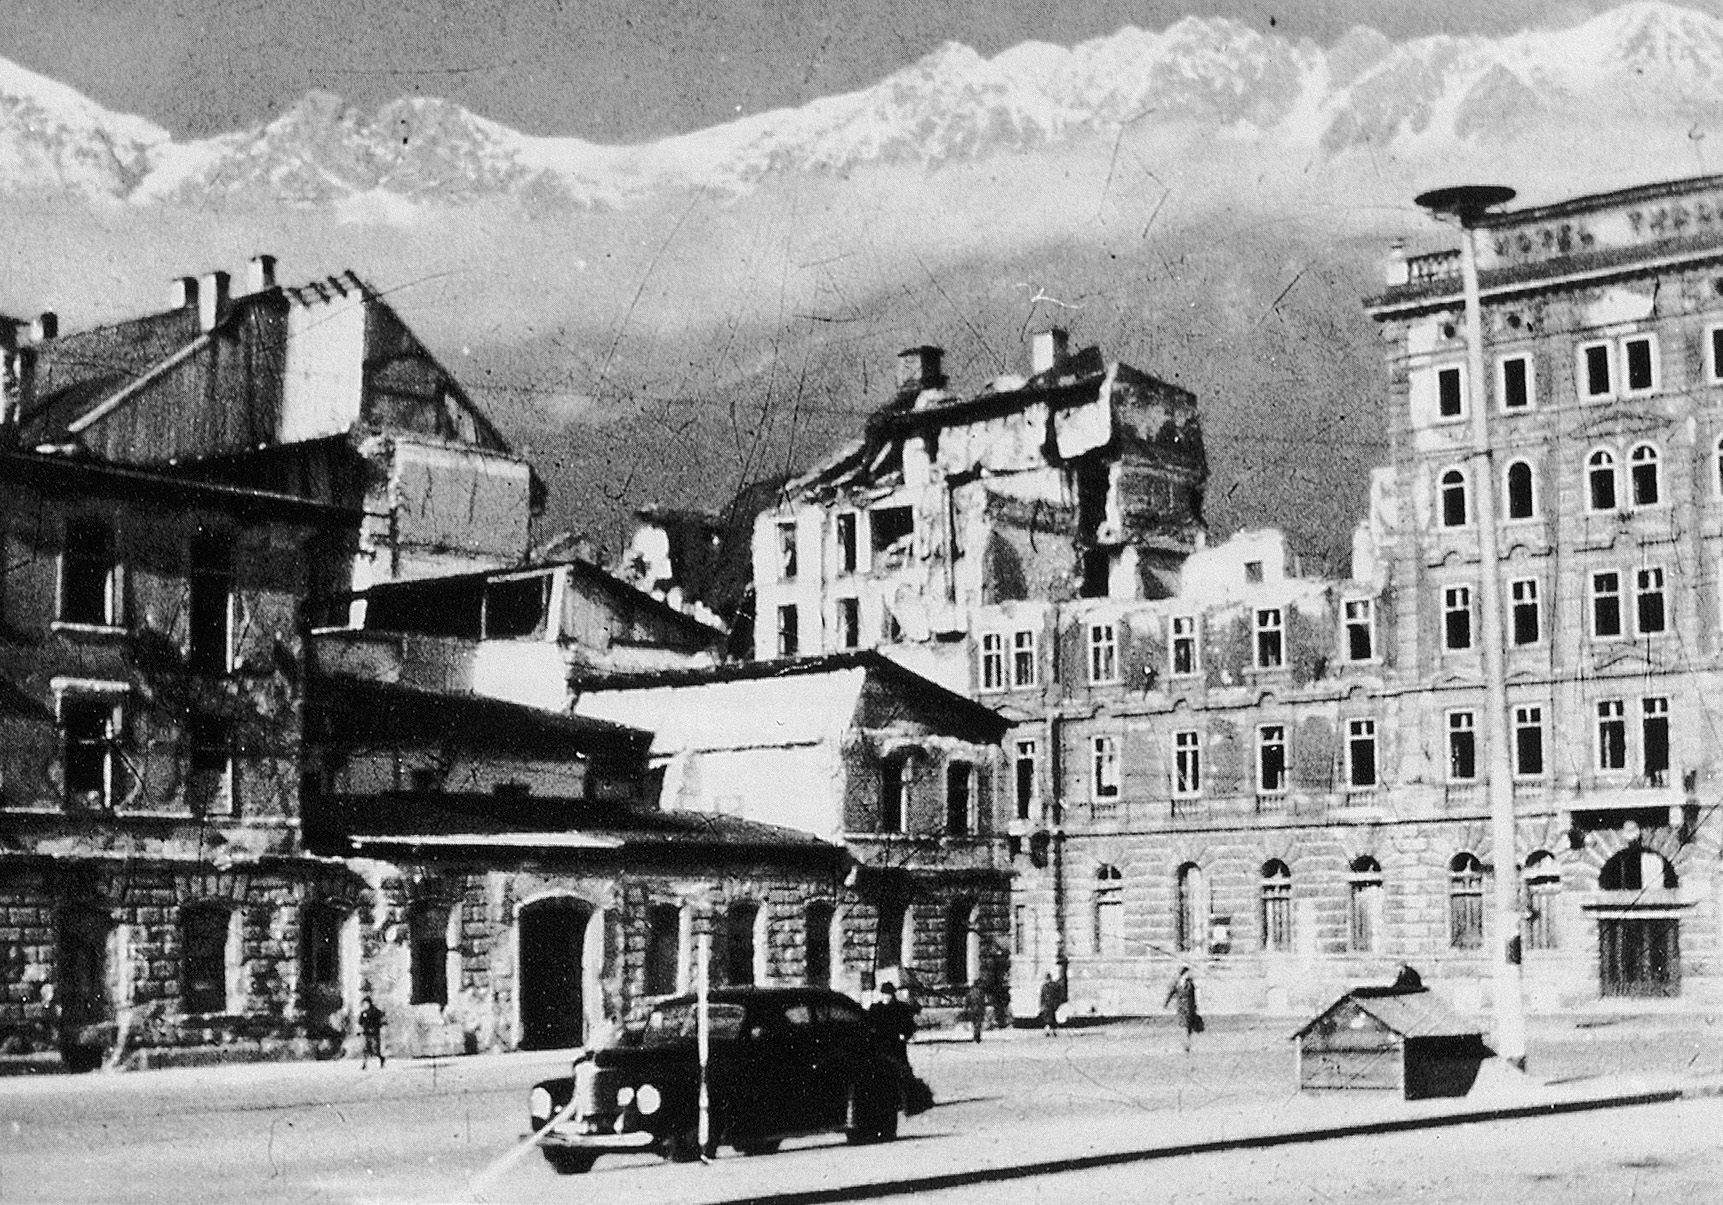 Bombed hotels after the war